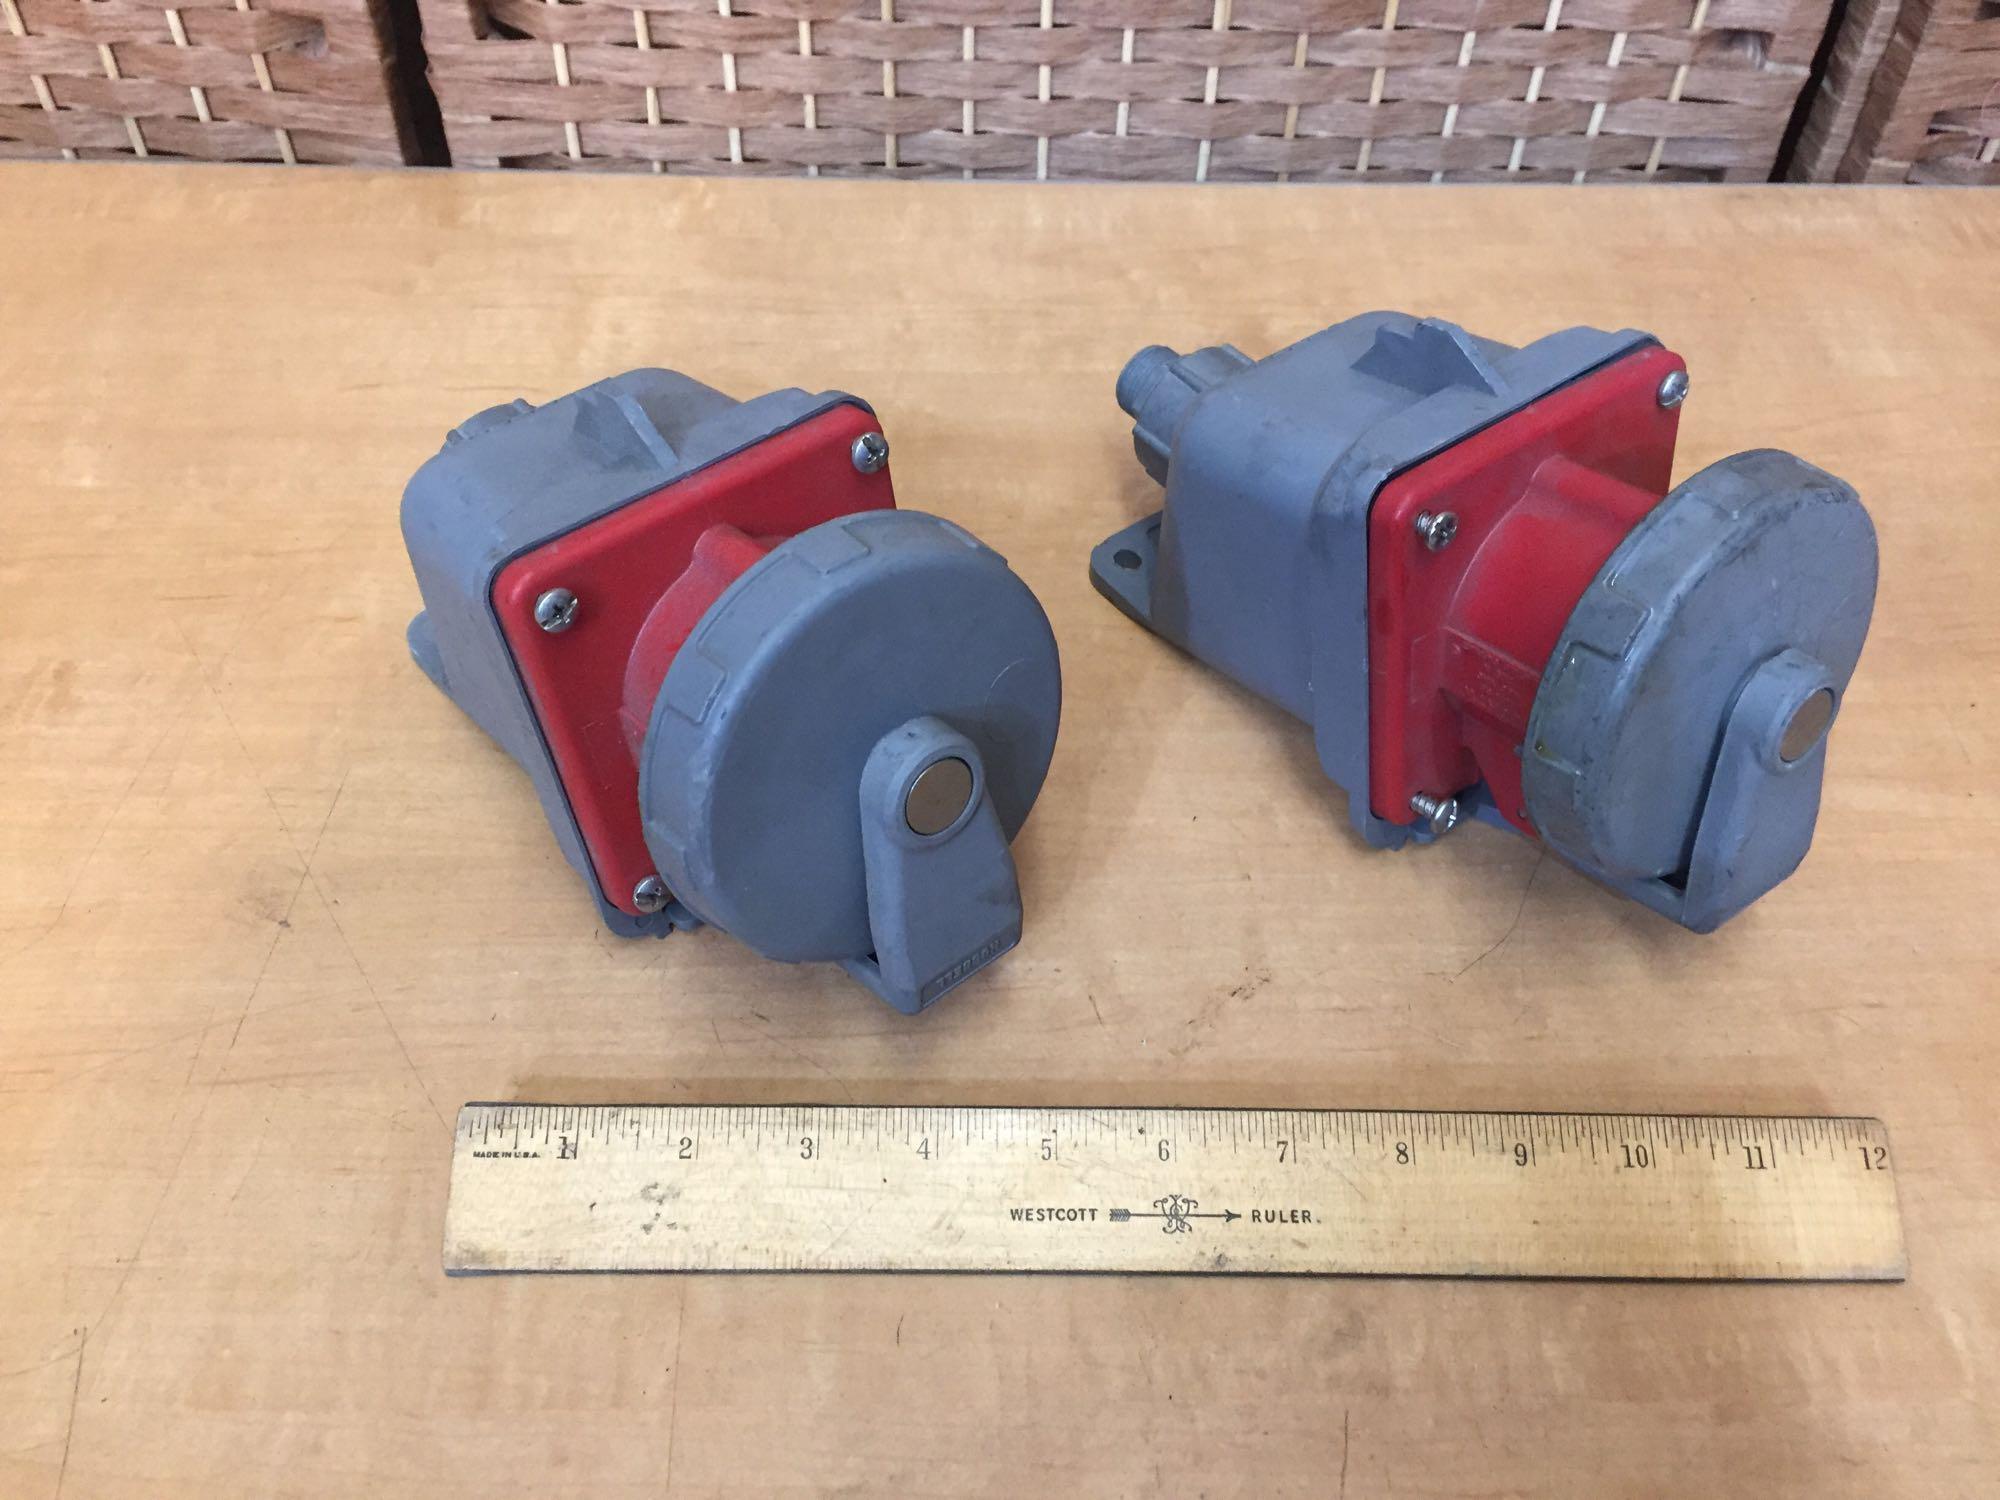 Hubbell 430R7W Industrial Grade Water-Tight 30A 480V 3phase Receptacles - 2pcs